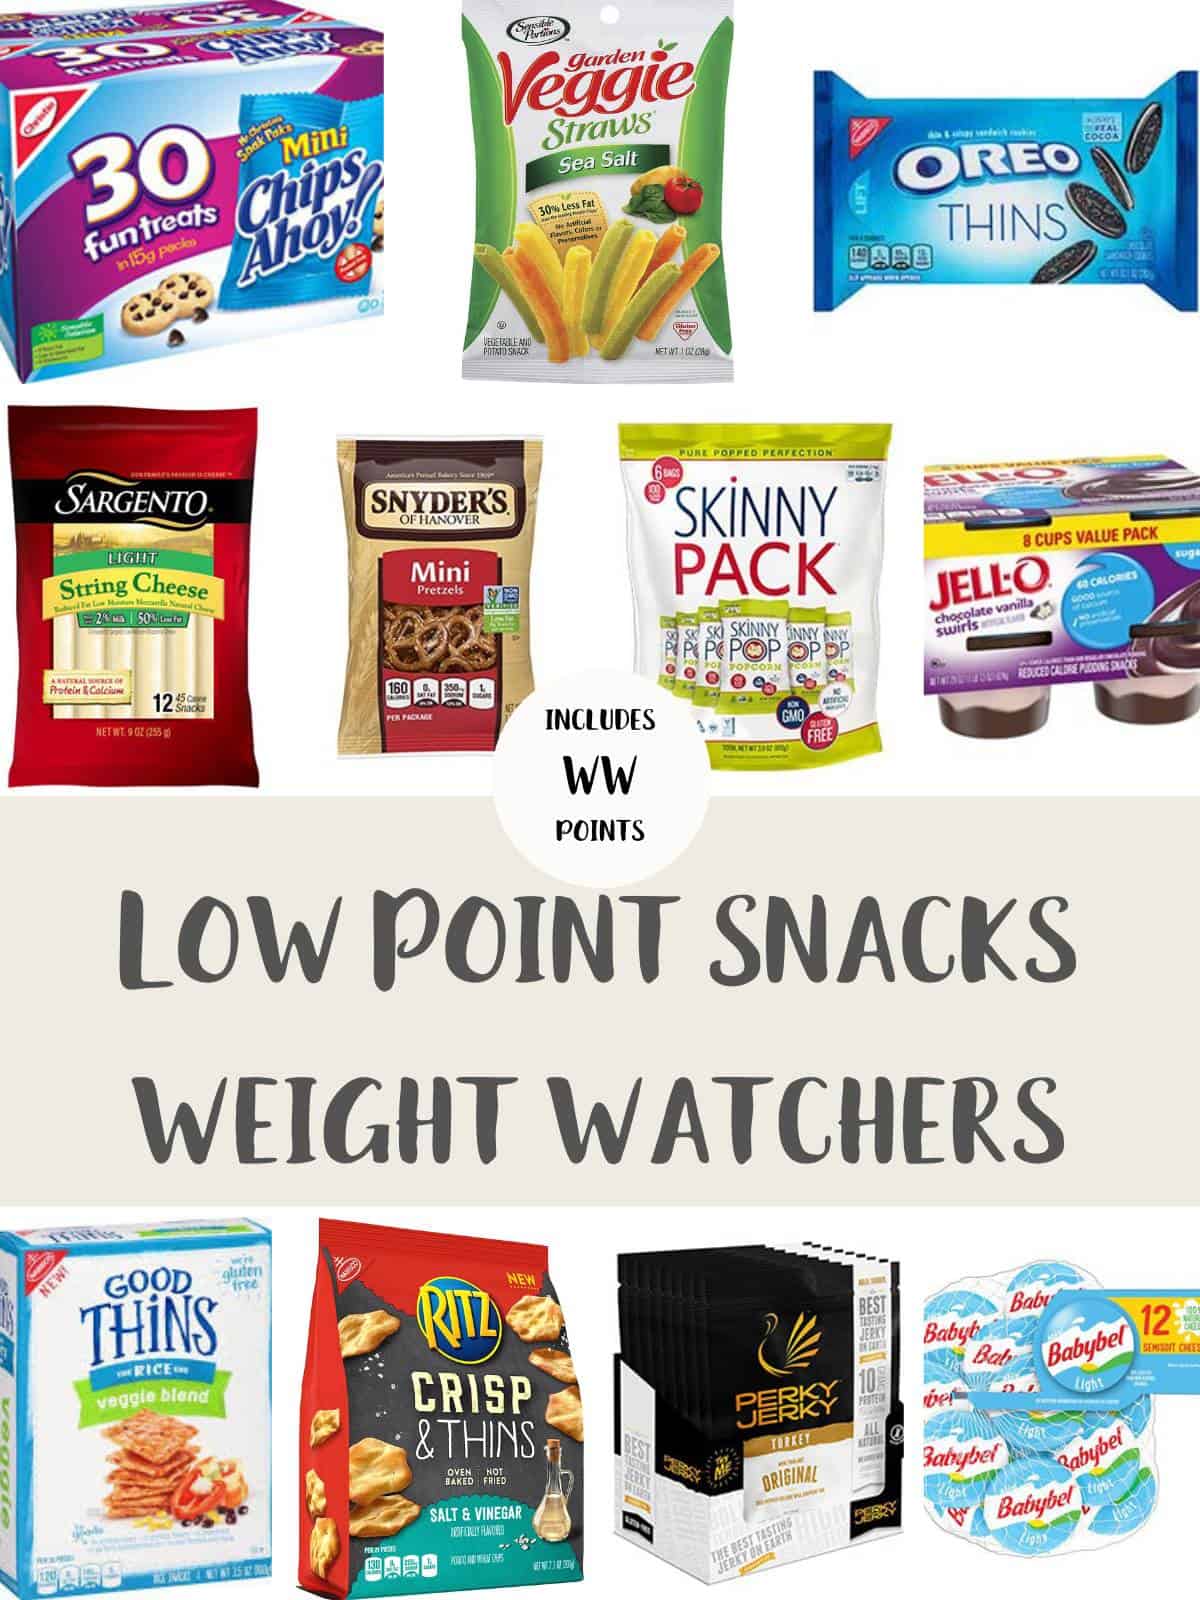 Photos of low Points snacks for Weight Watchers. Text overlaying stating Low Point Snacks Weight Watchers - includes WW Points.